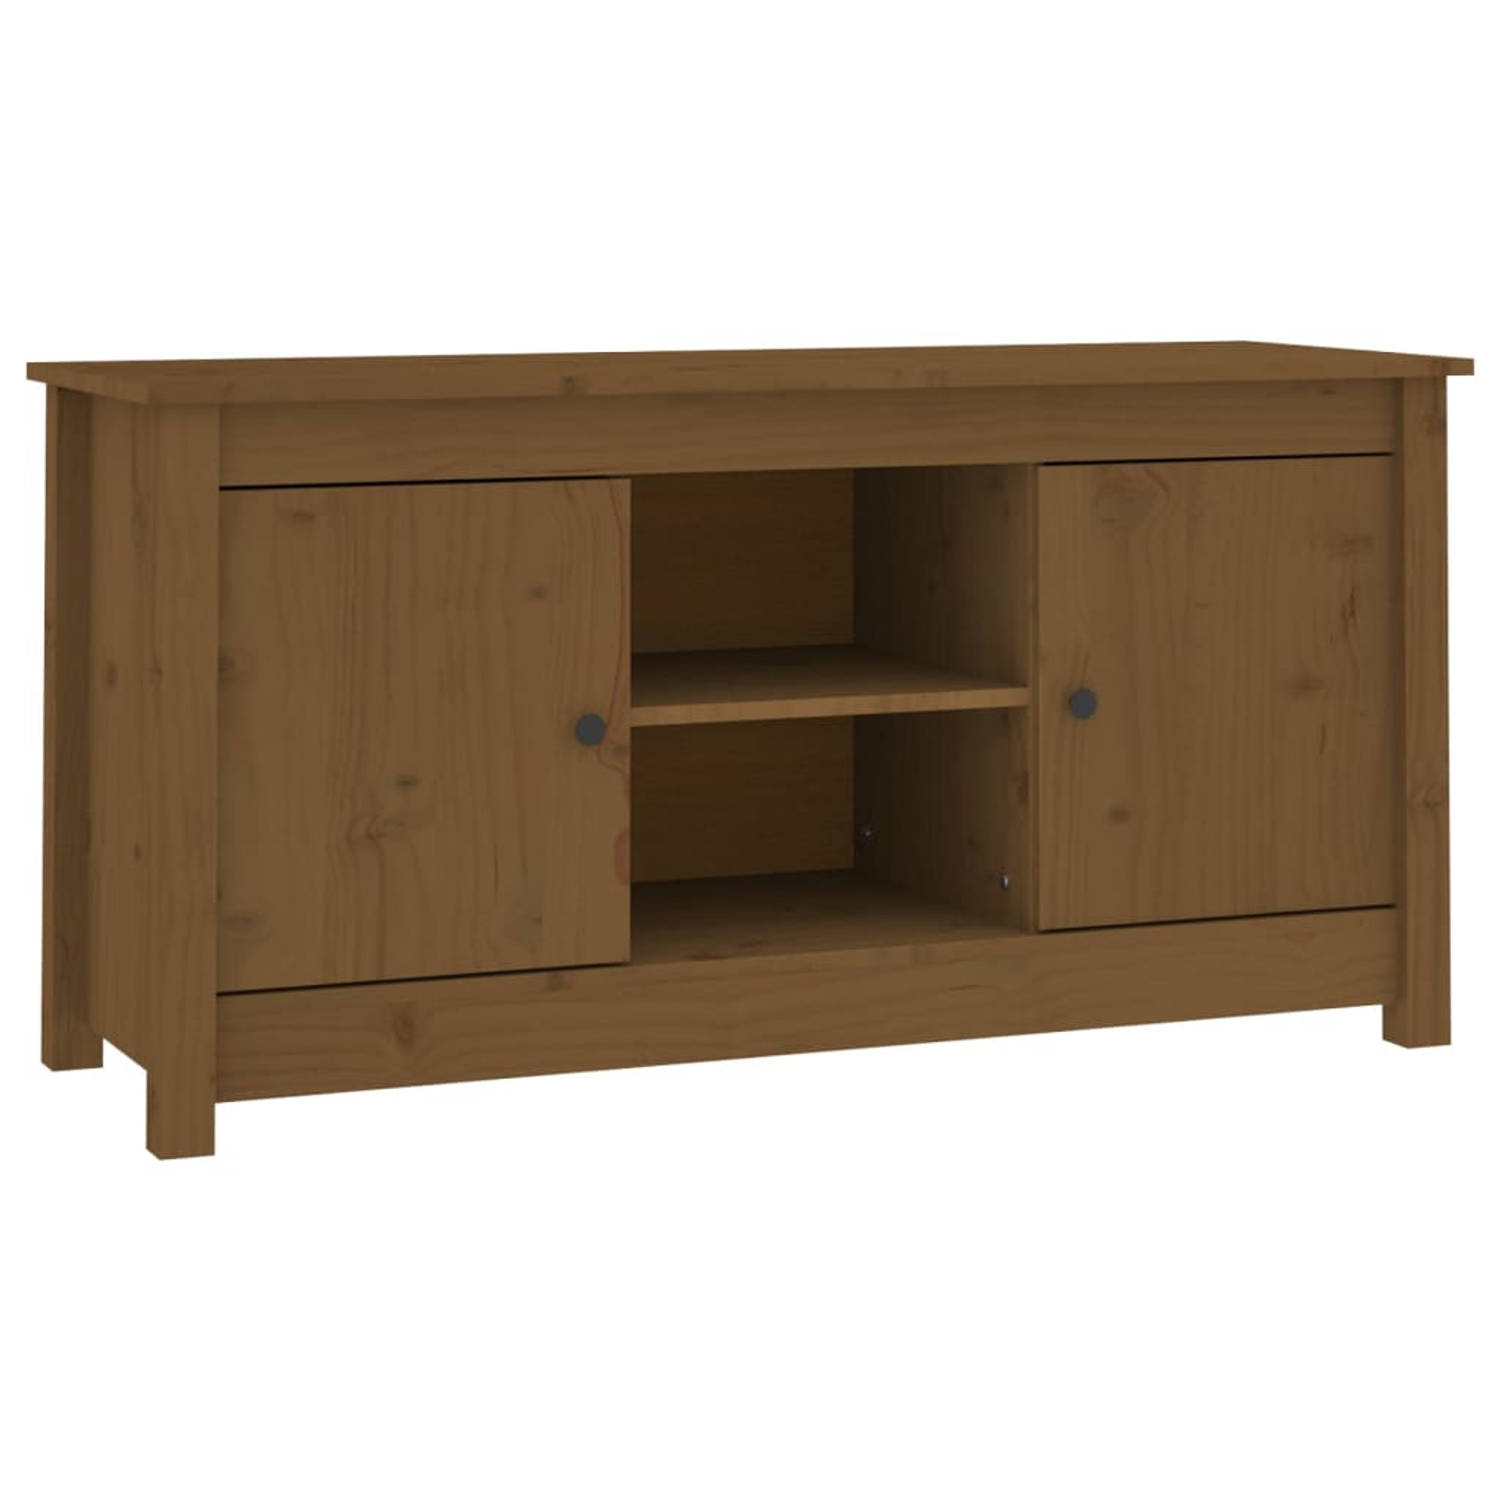 The Living Store TV-kast Serie Trendy - 103 x 36.5 x 52 cm - Massief grenenhout